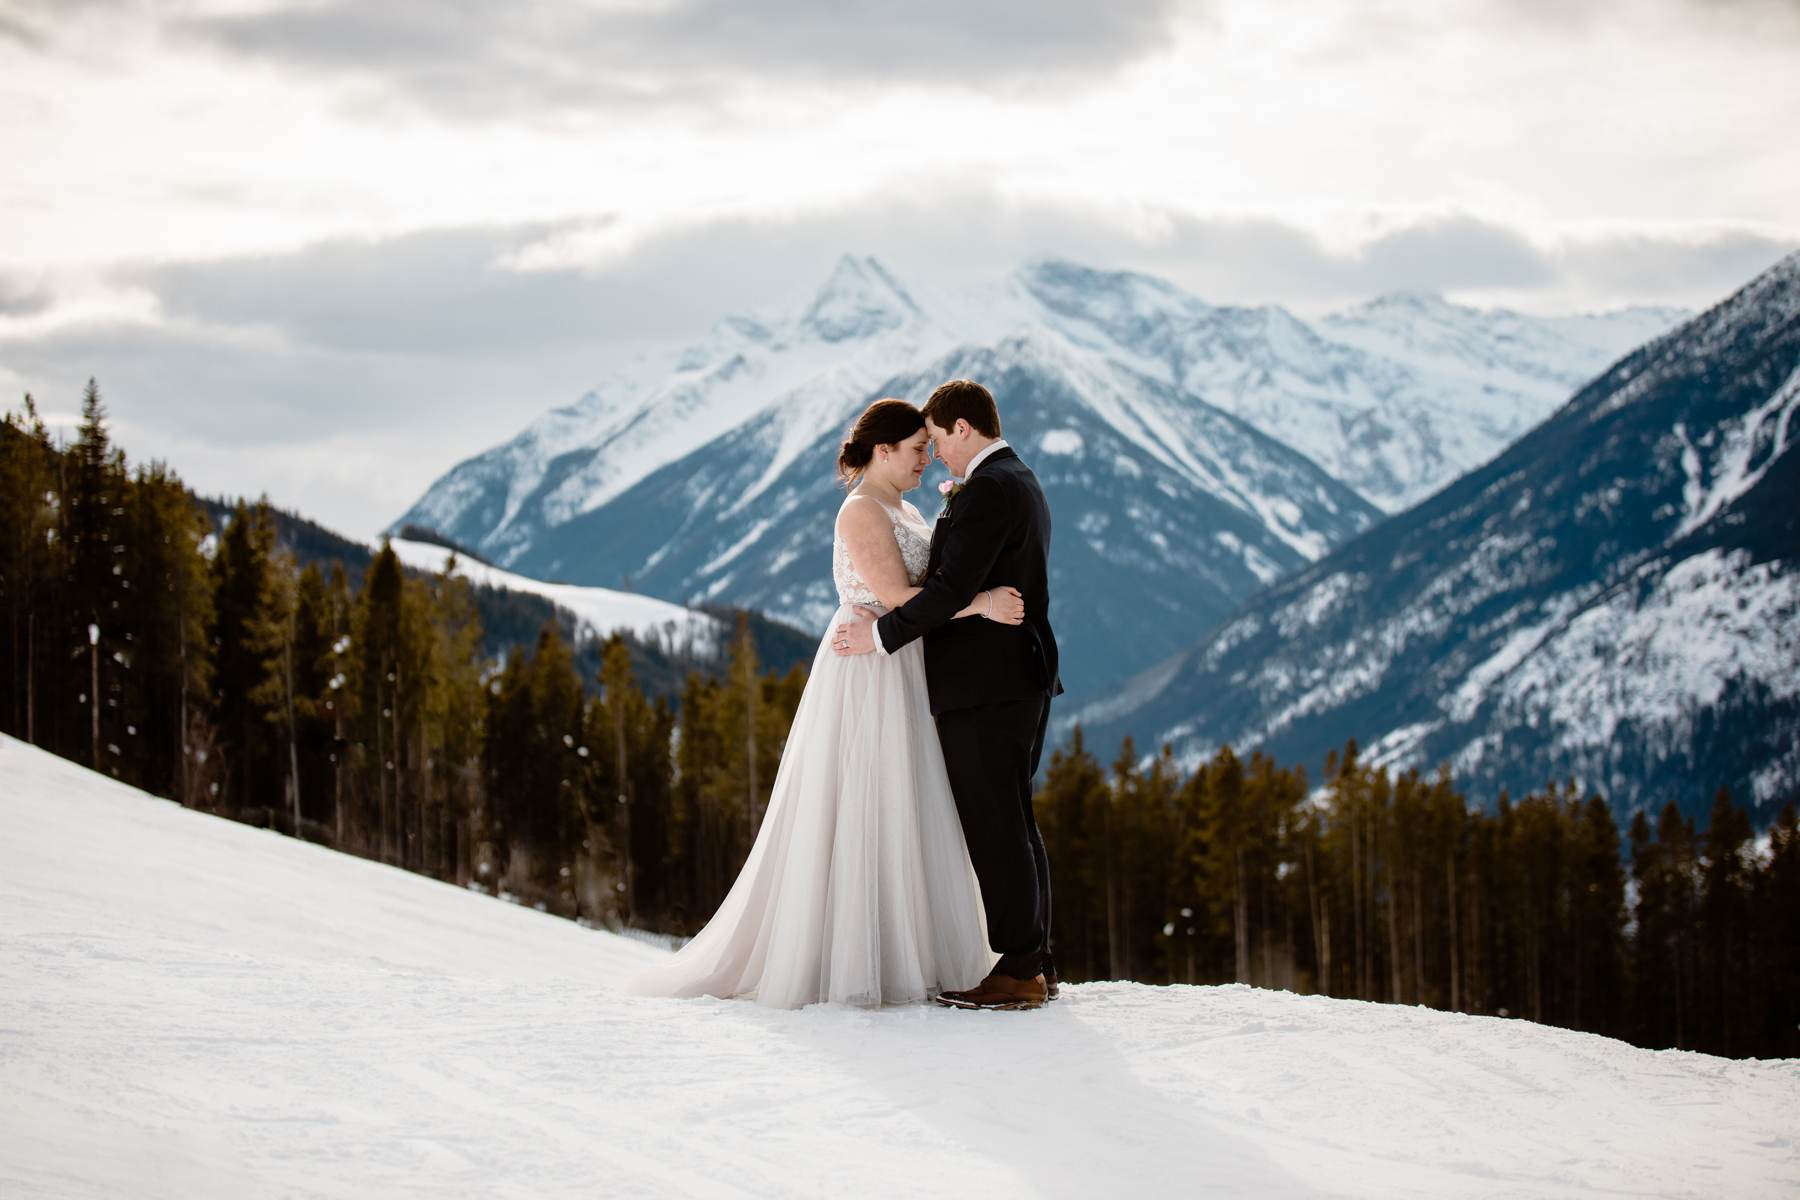 Invermere Wedding Photographers at Eagle Ranch and Panorama Ski Resort - Image 41